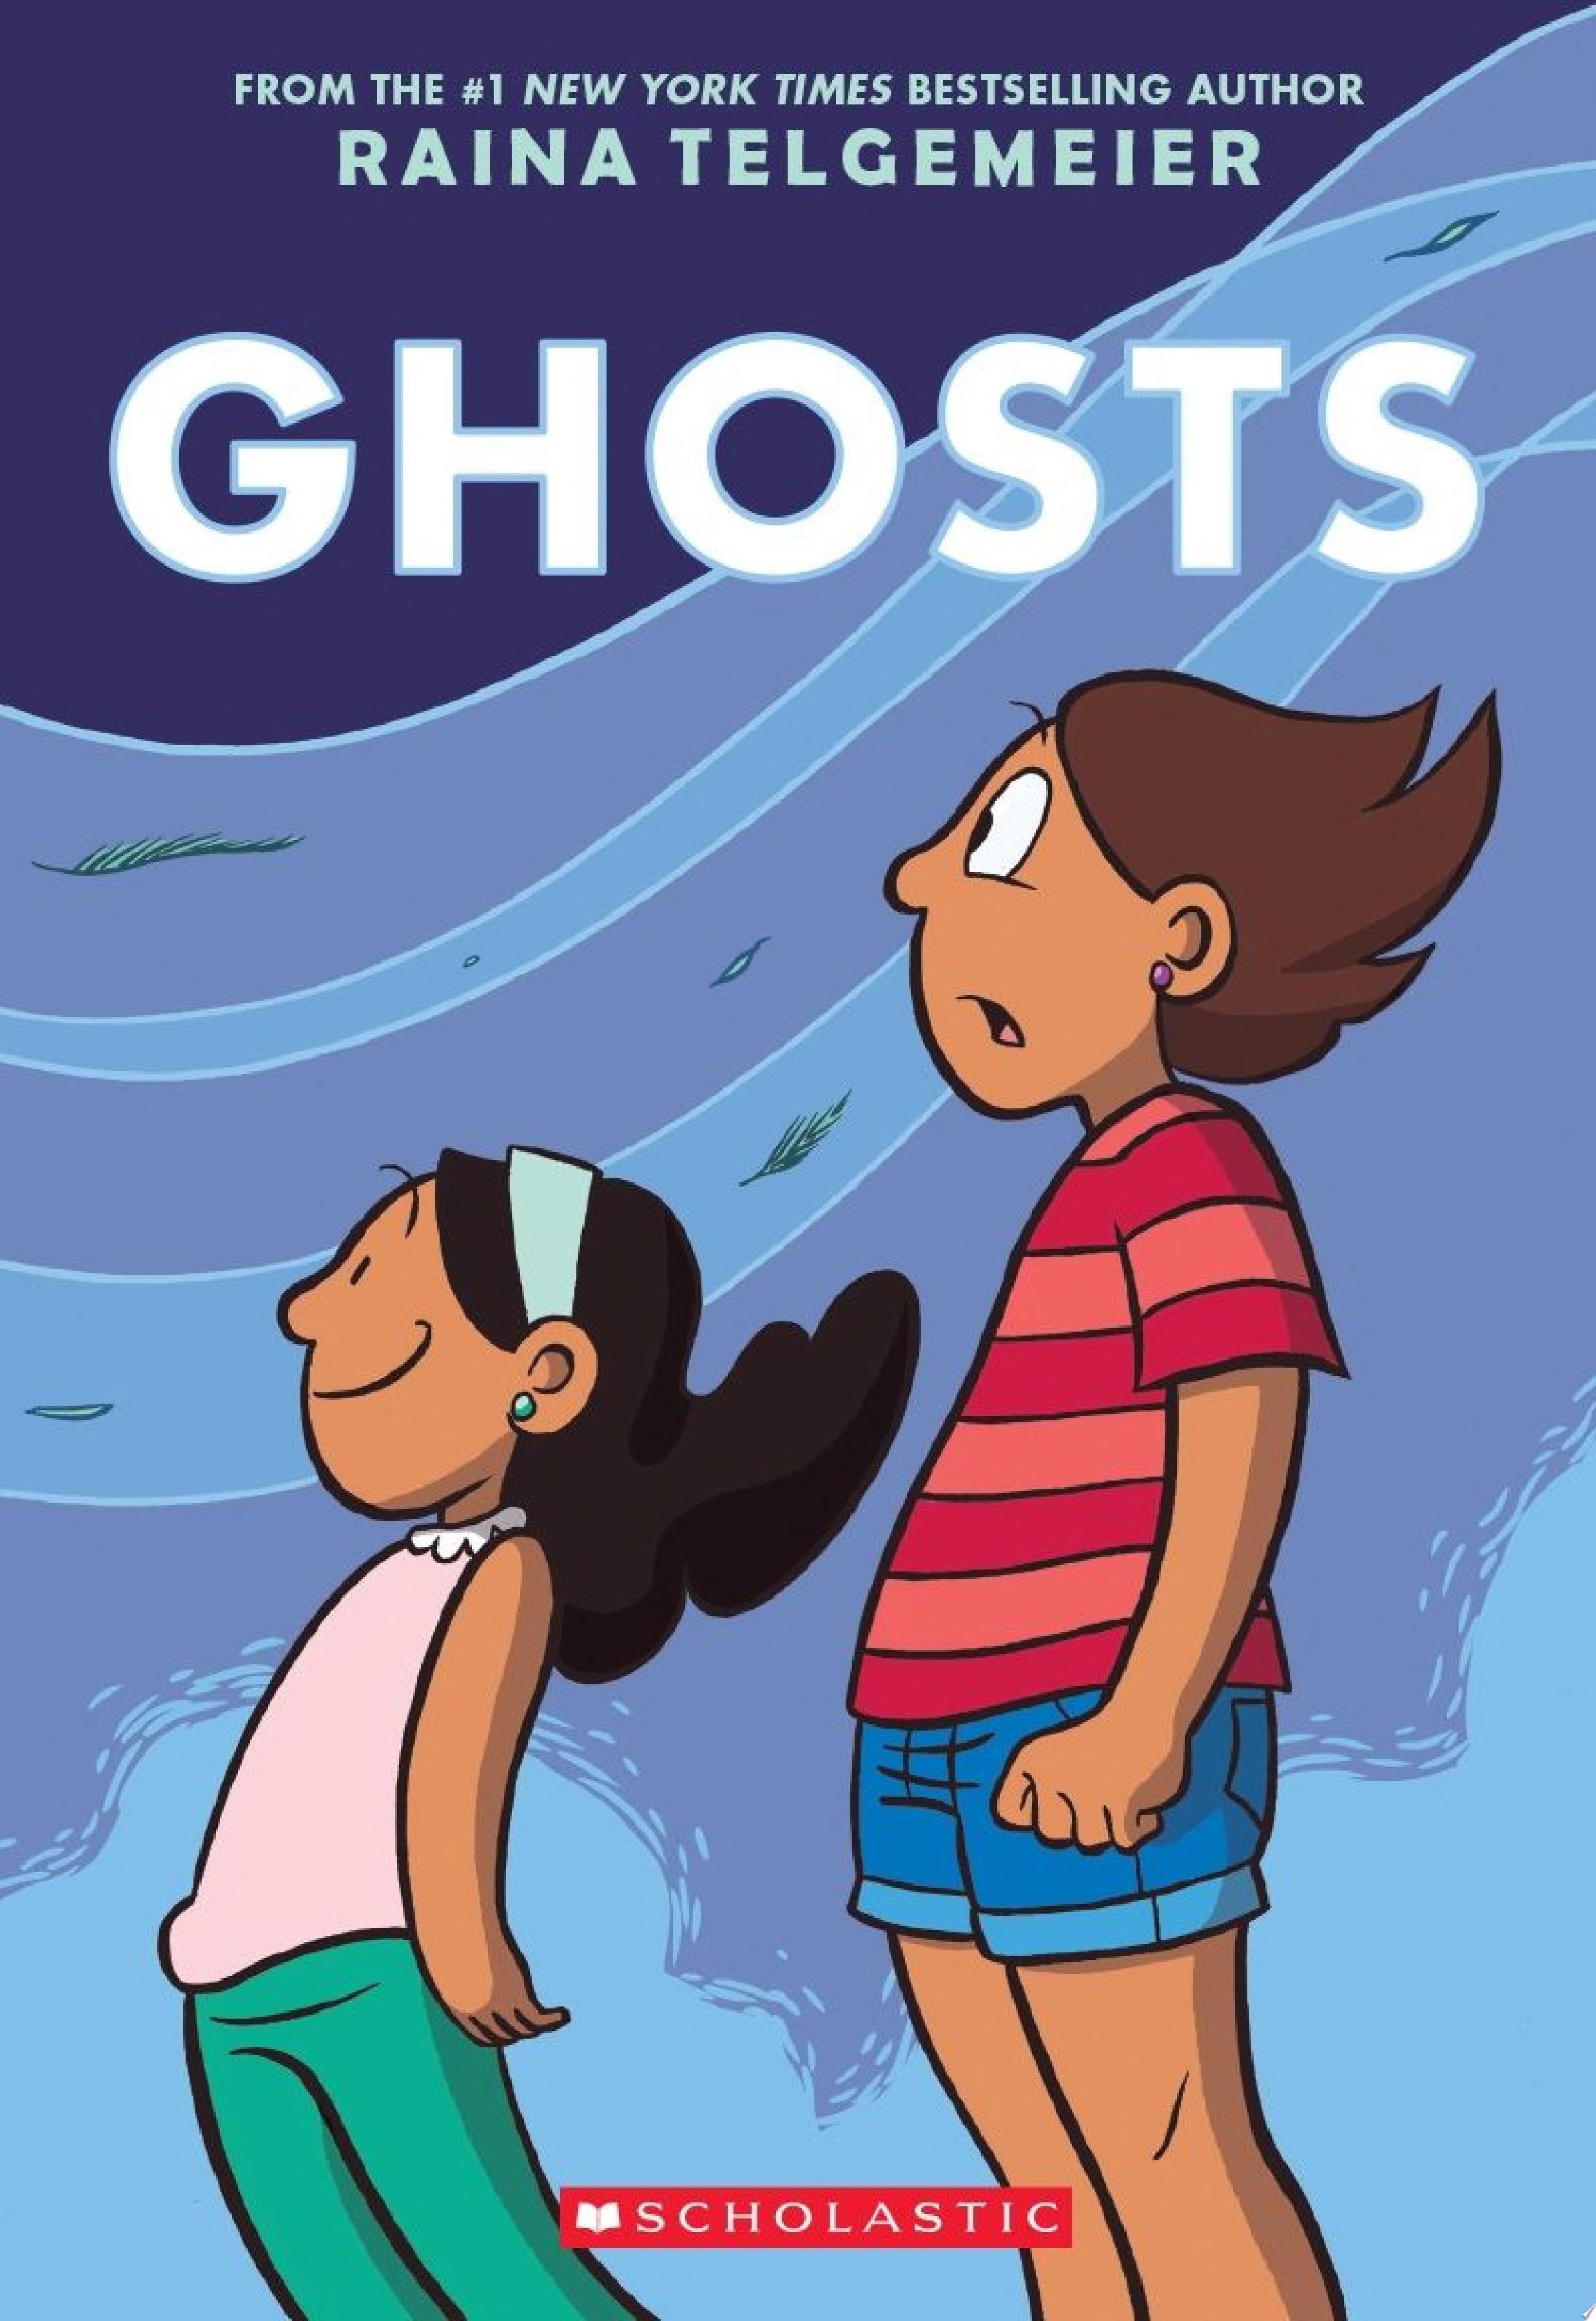 Image for "Ghosts: A Graphic Novel"